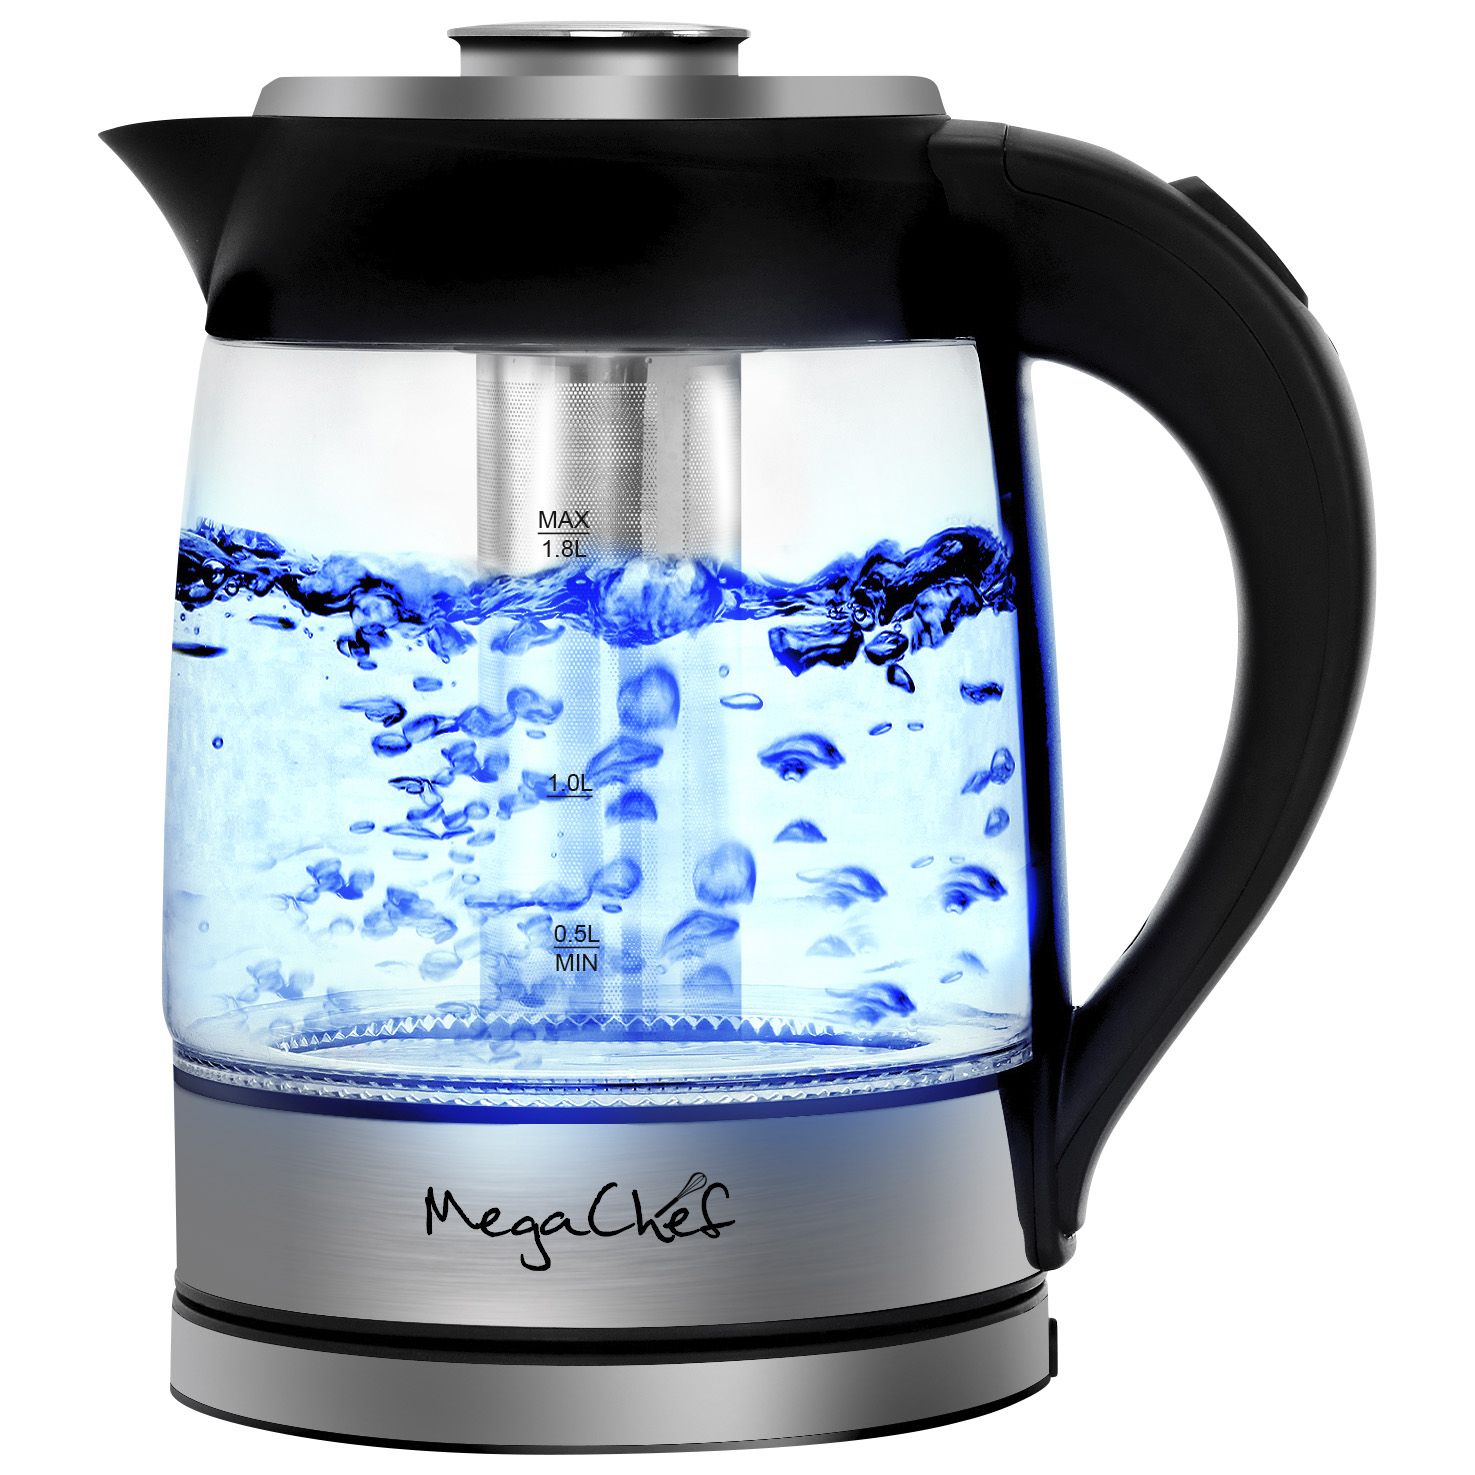 Chefman Electric Glass Kettle With Removable Tea Infuser Review and Useful  Tips 